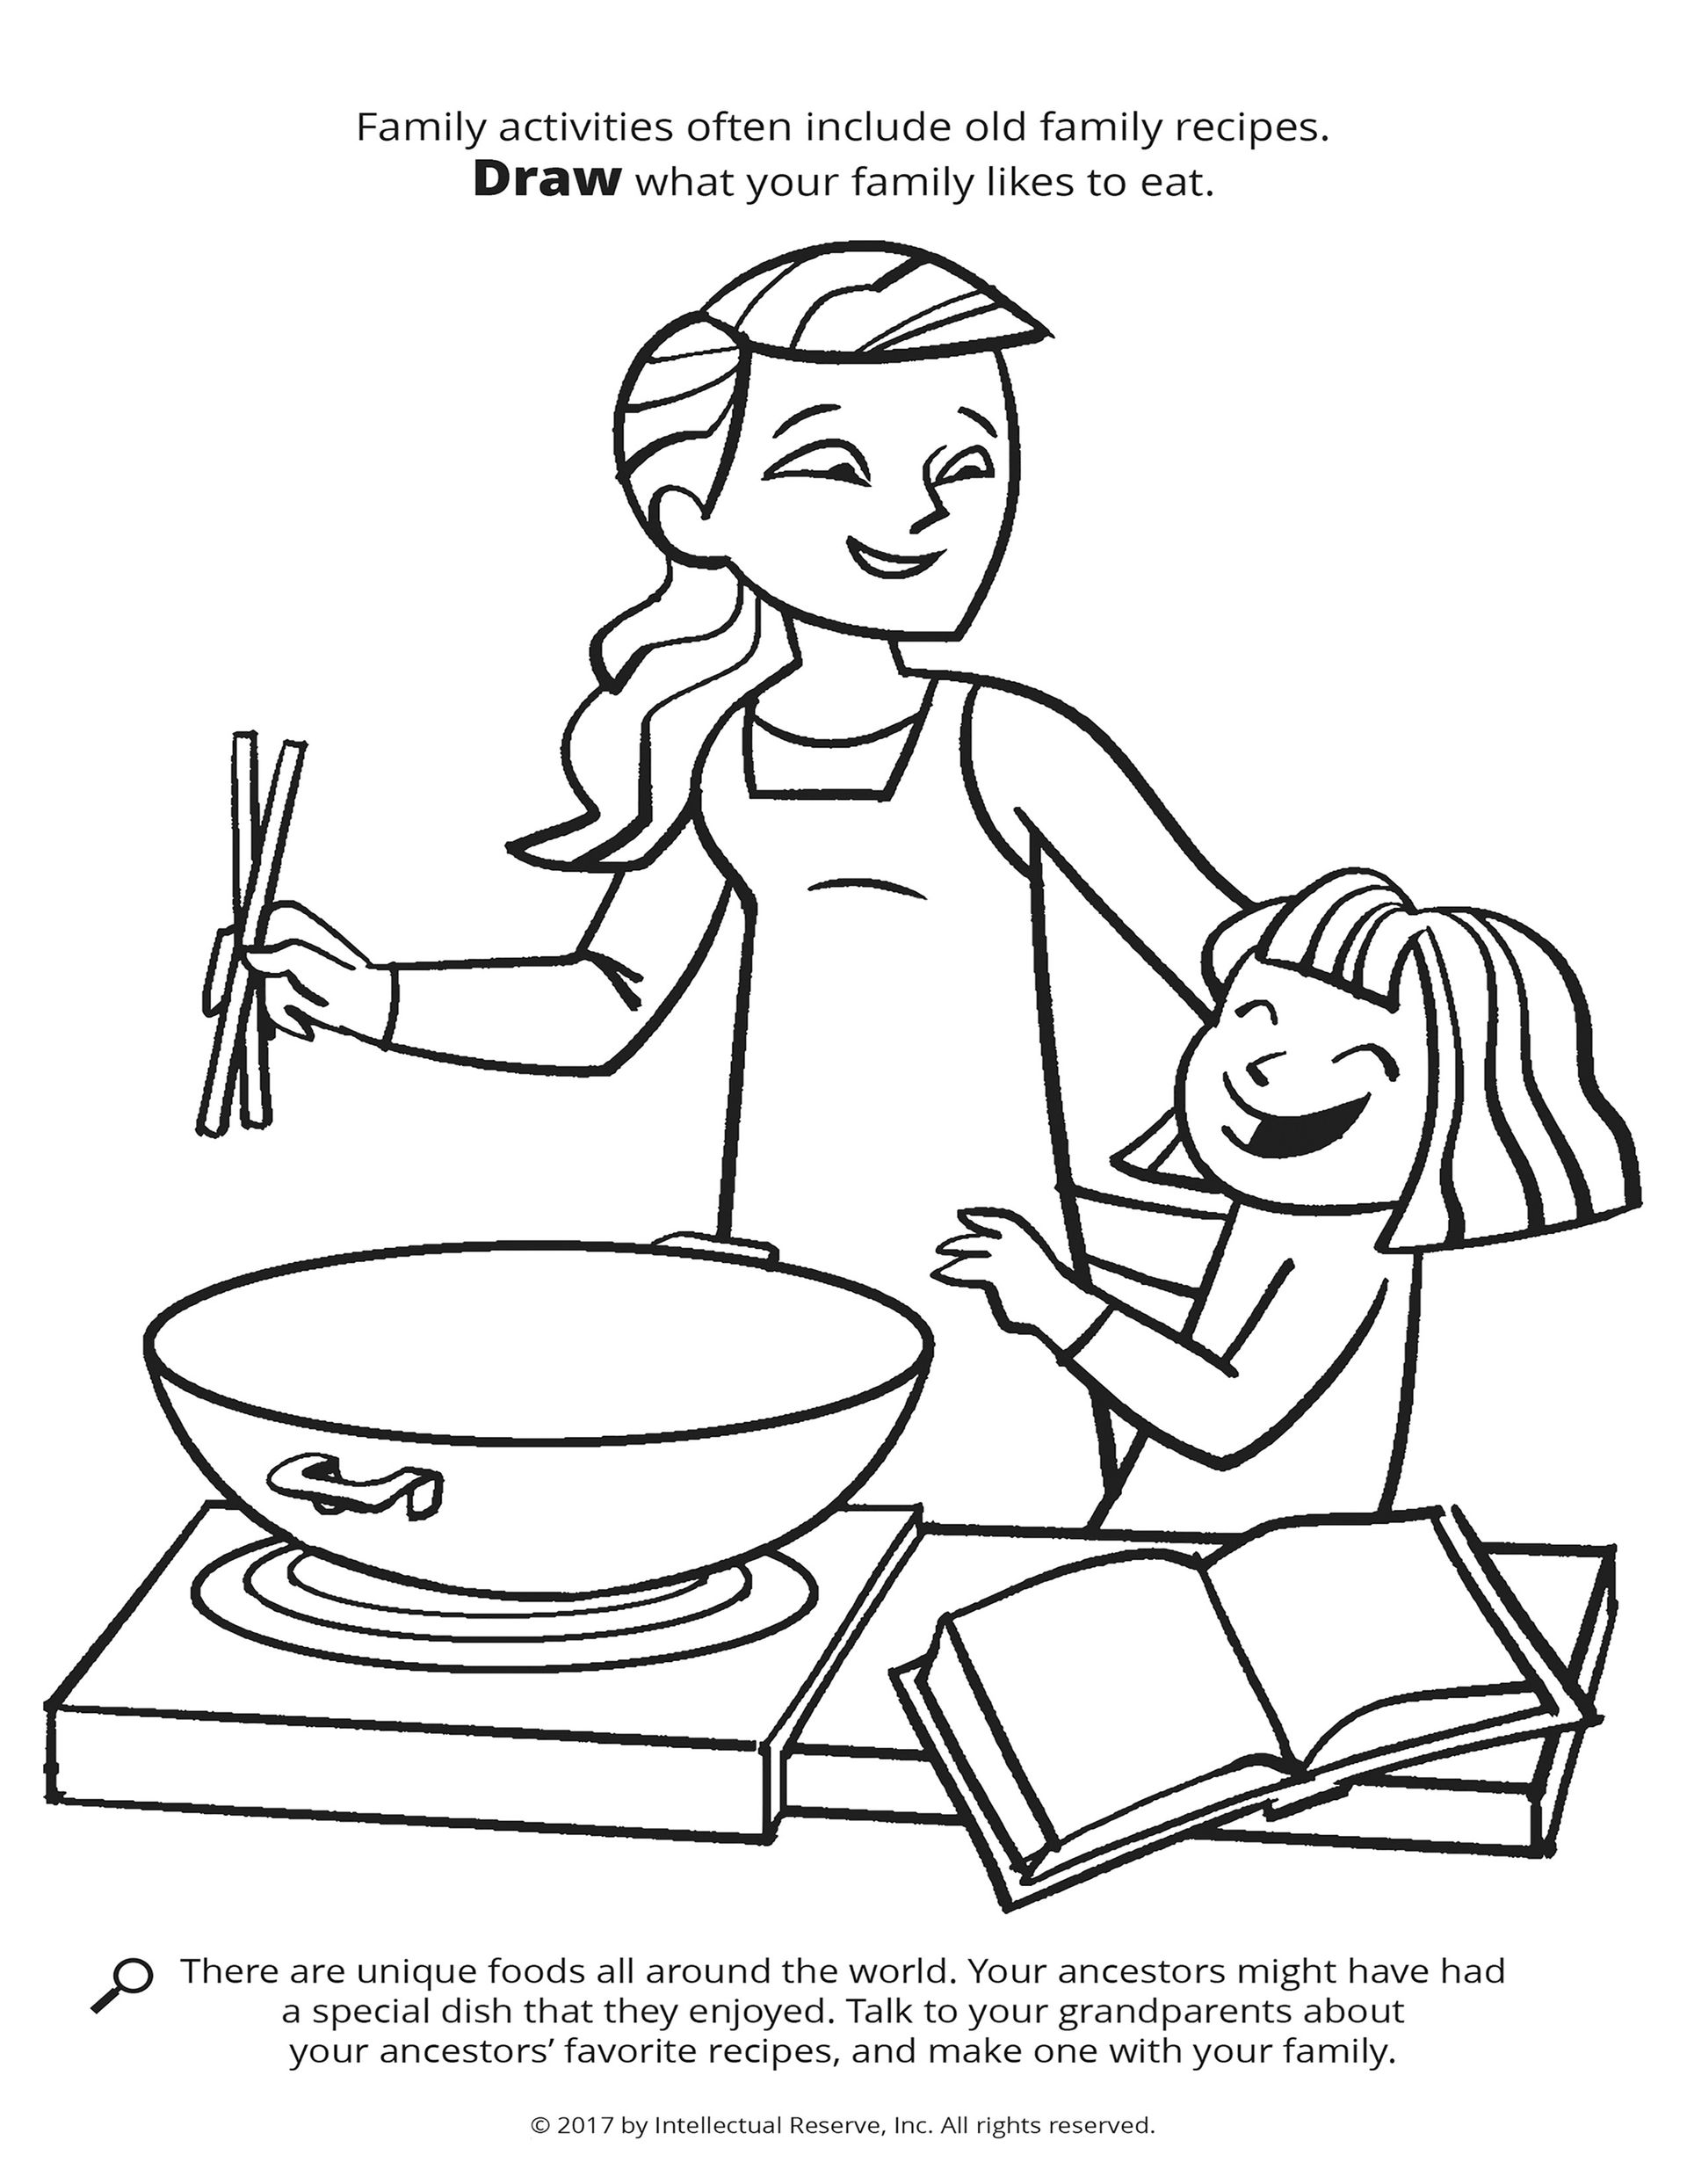 Family activities often include old family recipes. Draw what your family likes to eat. There are unique foods all around the world. Your ancestors might have had a special dish that they enjoyed. Talk to your grandparents about your ancestors’ favorite recipes, and make one with your family.